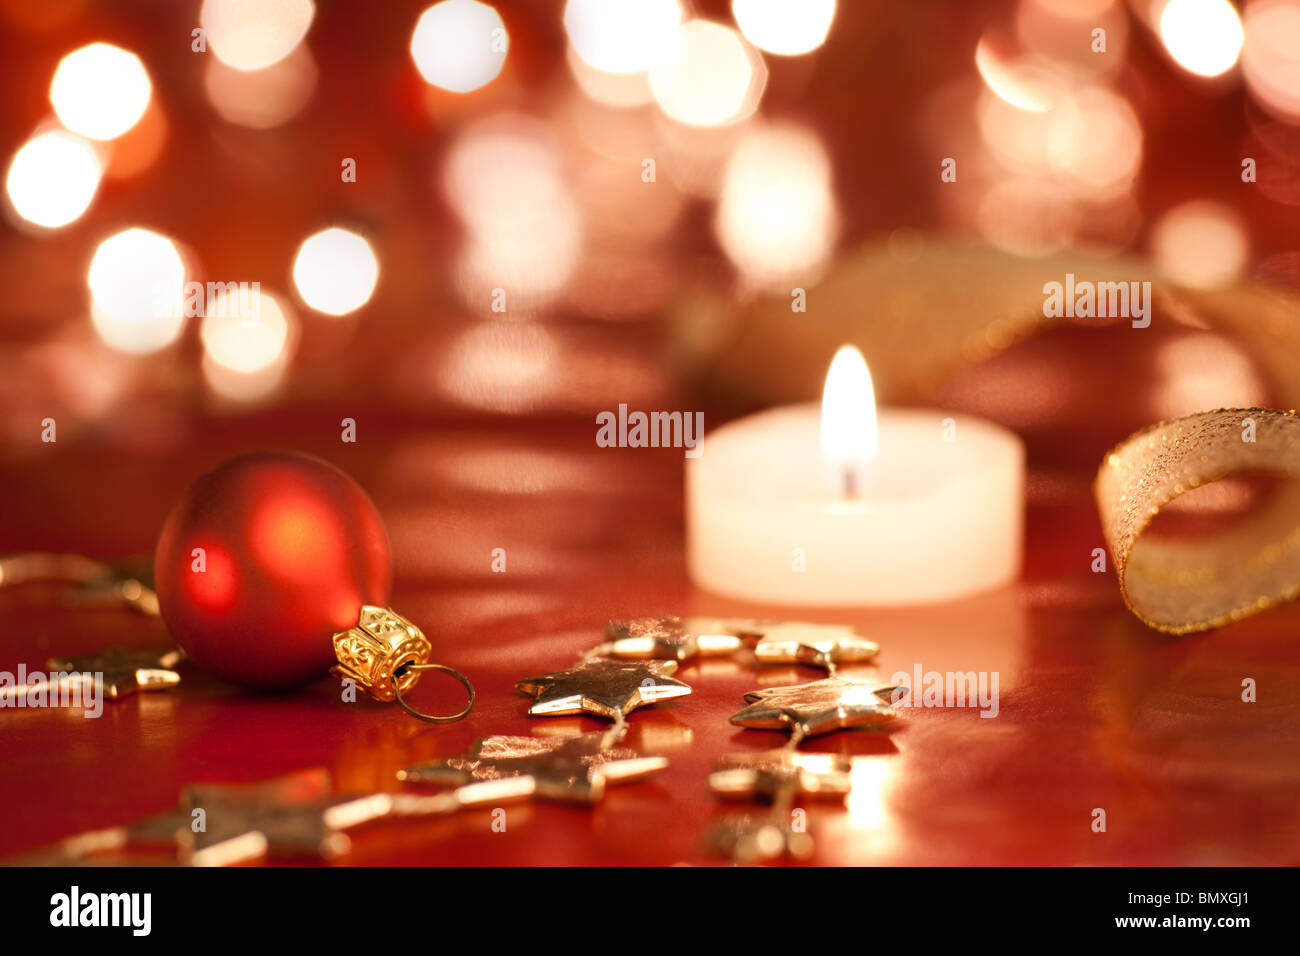 Christmas decoration with bauble. Shallow dof, focus on bauble, aRGB. Stock Photo